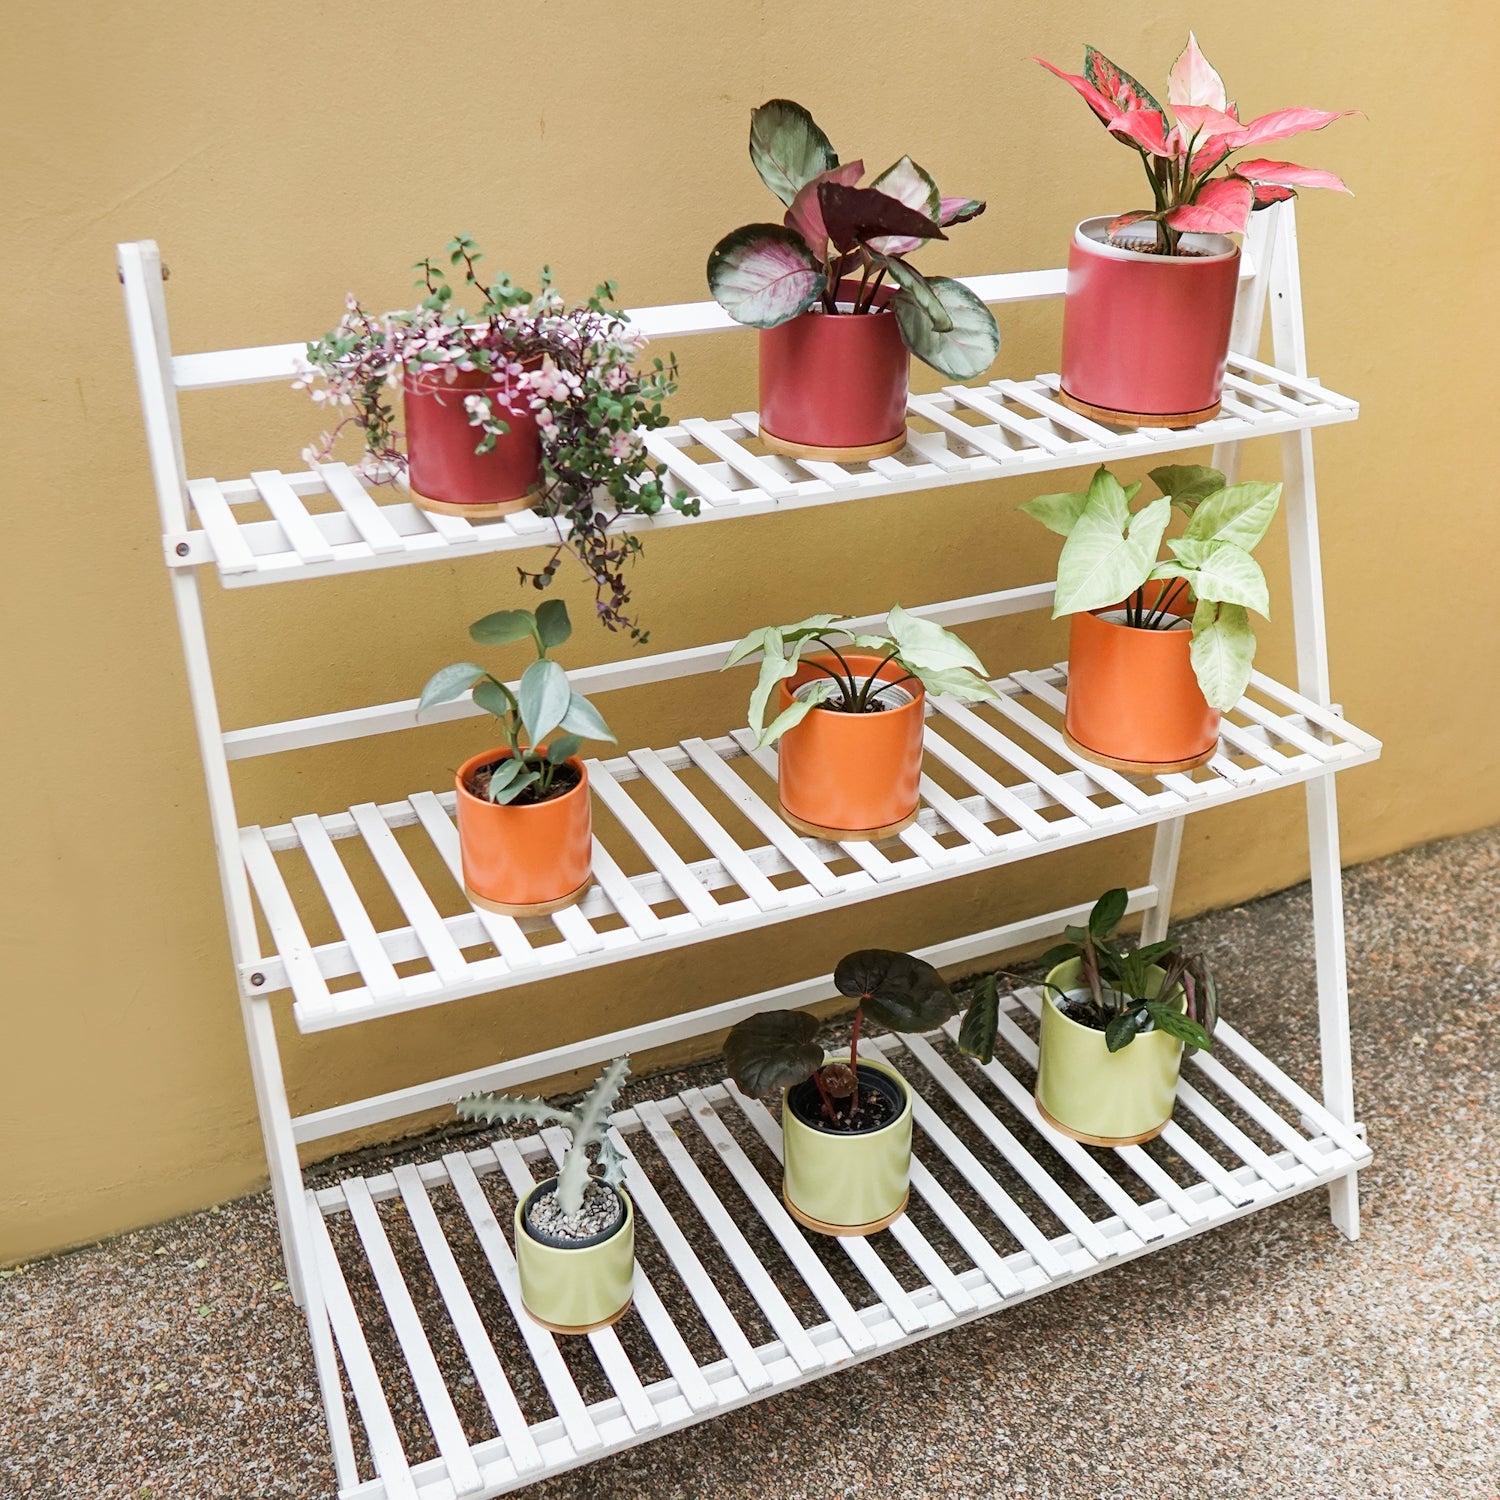 Bamboo Plant Rack - Pots For Plants